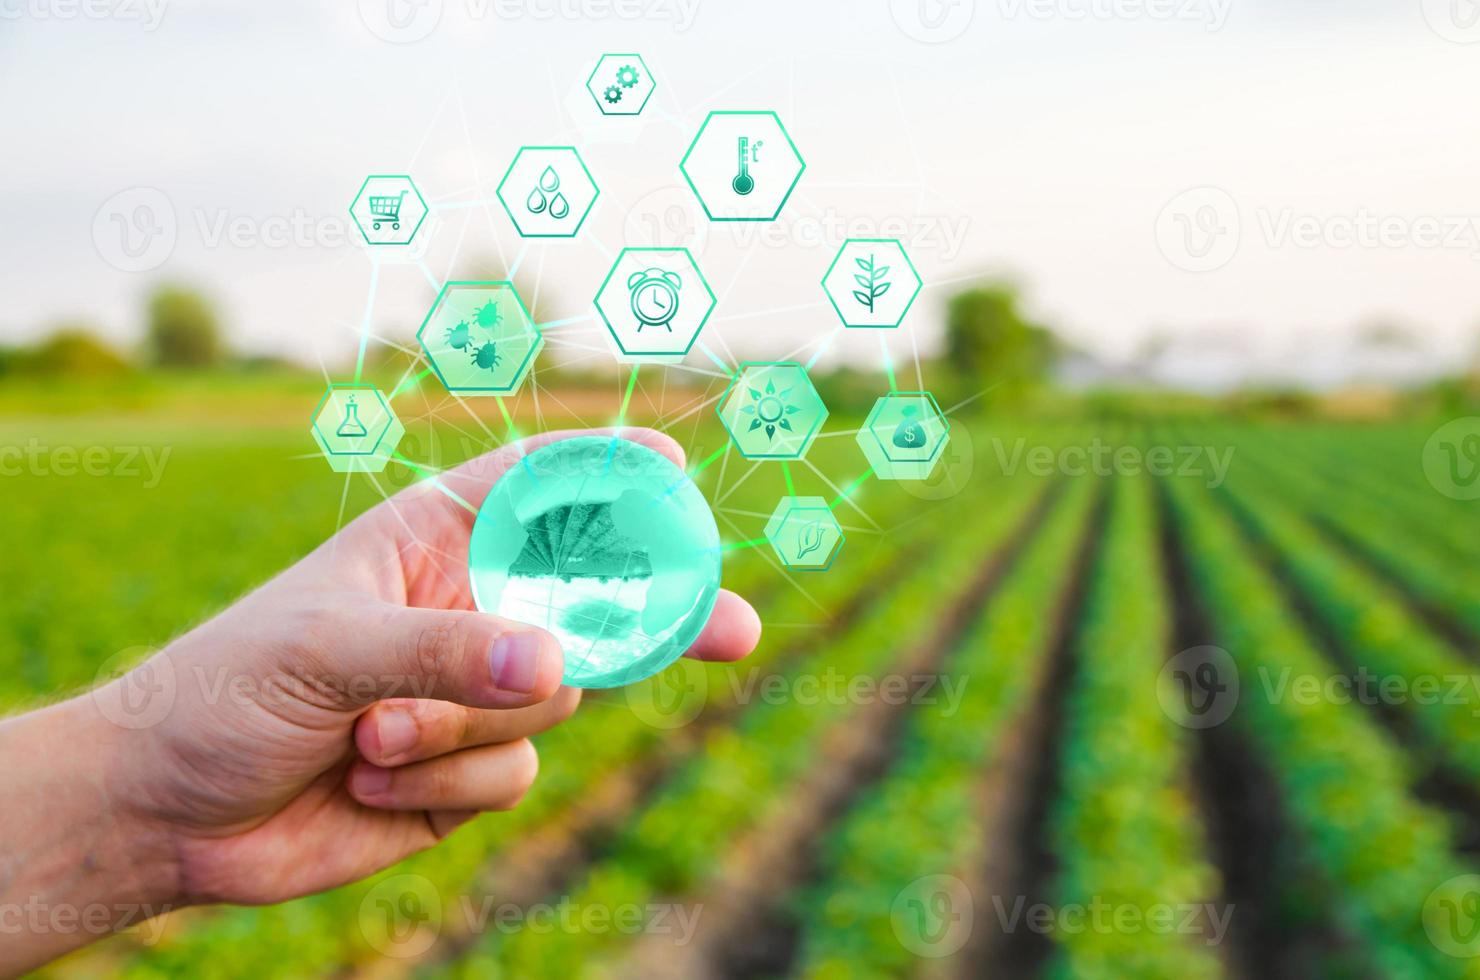 Holding a globe with innovations on farm field background. Use of innovative technologies in agriculture. Internet of Things and industry digitalization. Agroindustry and agribusiness. Agriculture photo